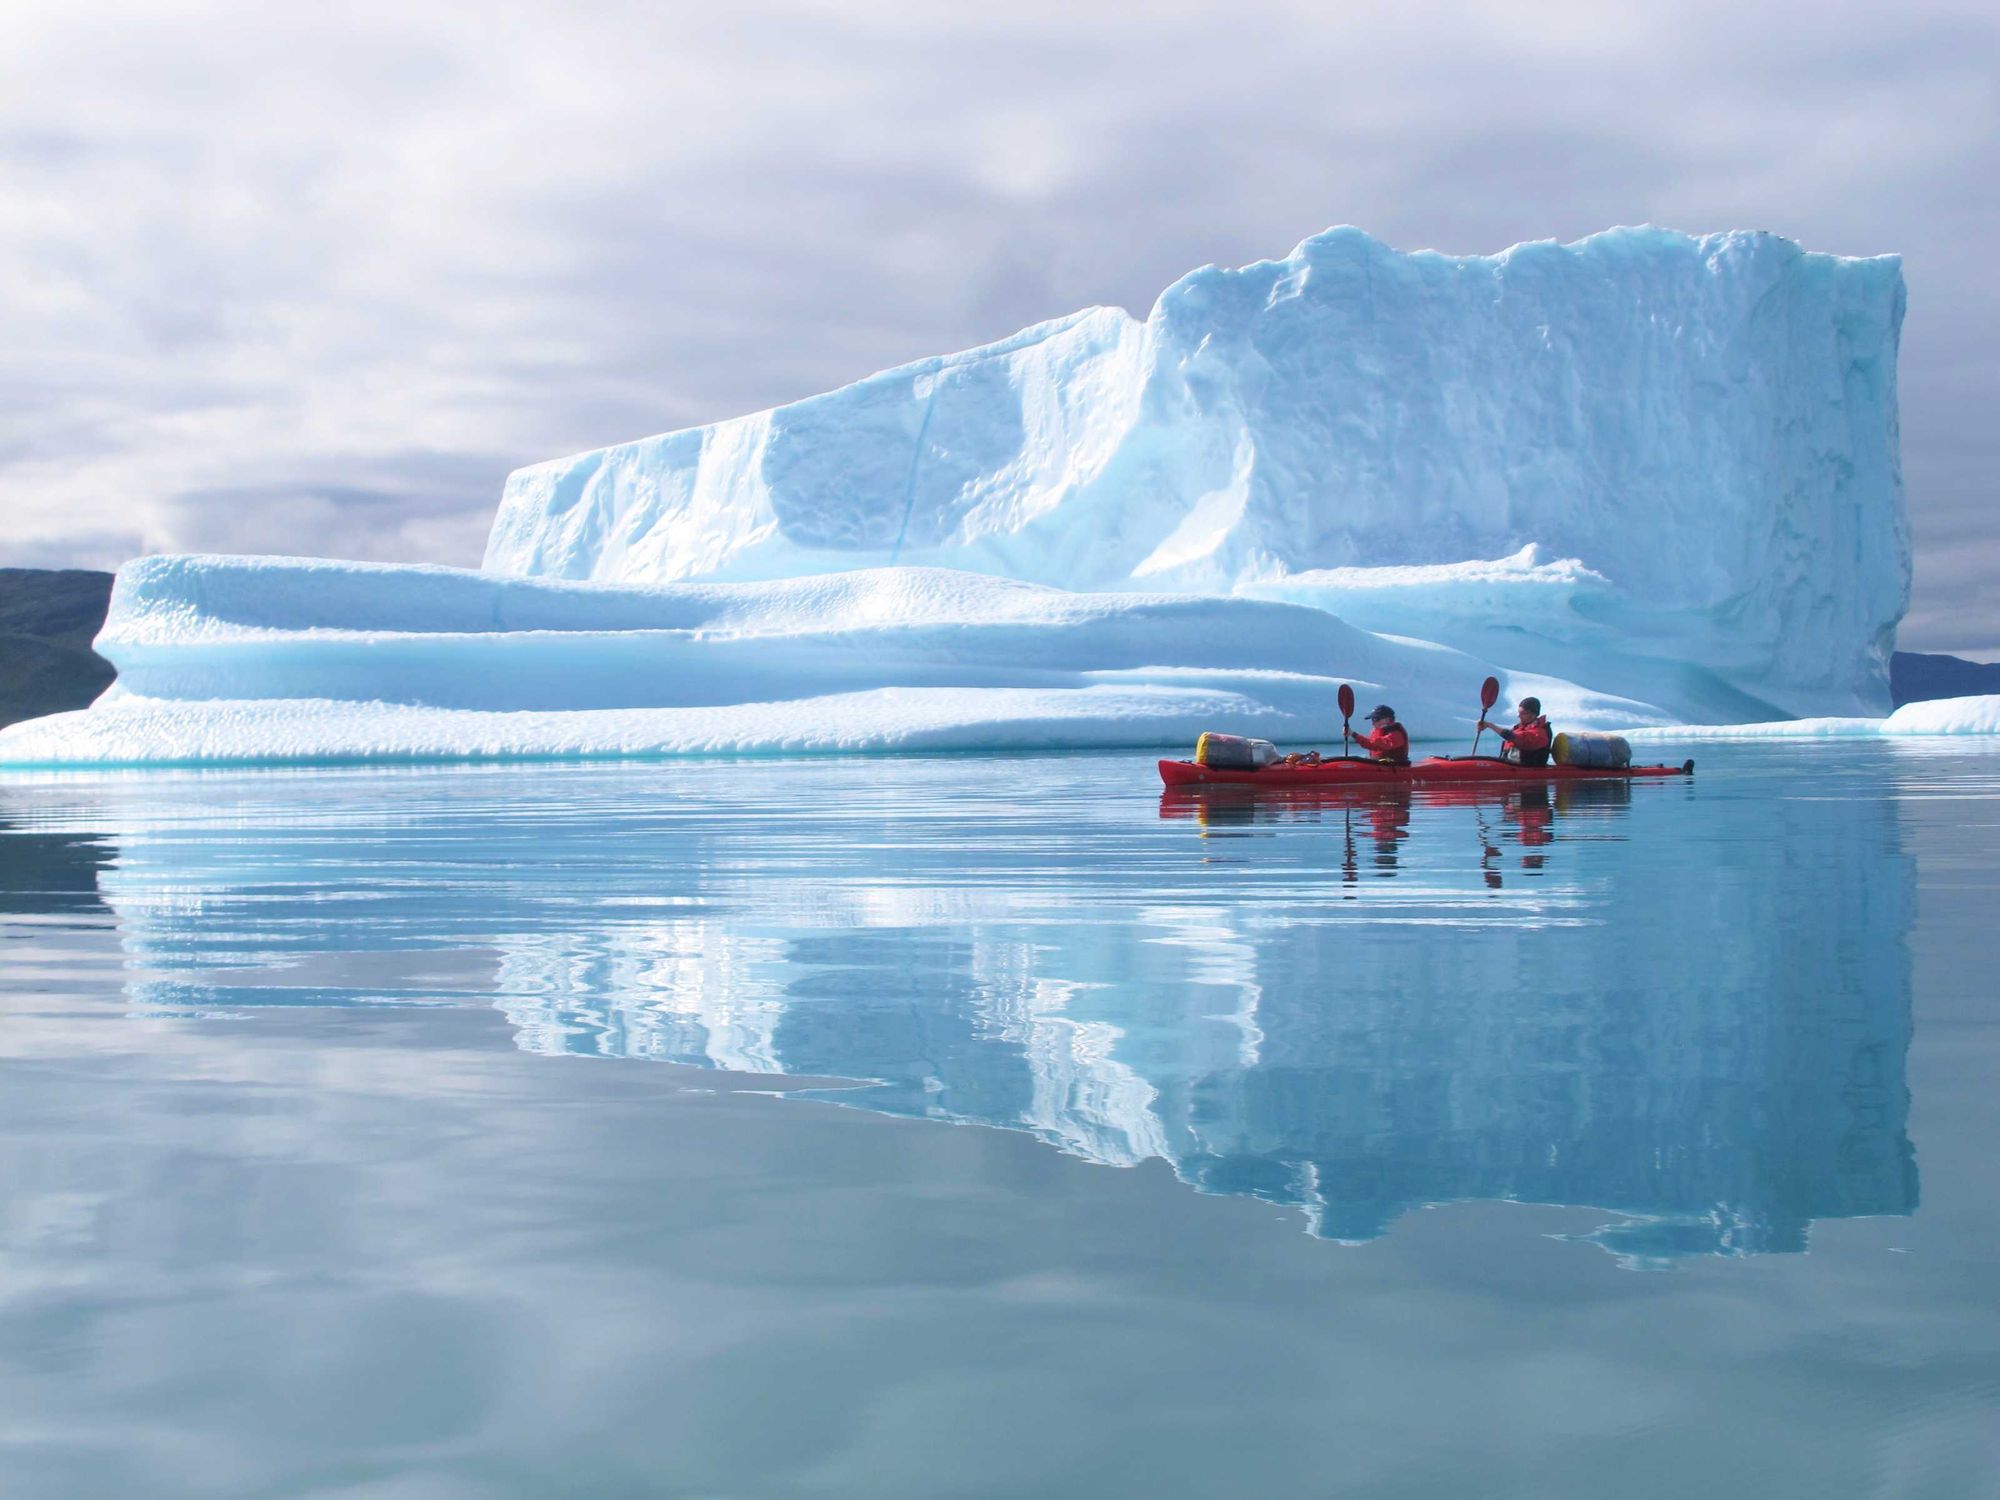 Two kayakers in a double kayak in the shadow of an enormous iceberg in Greenland.